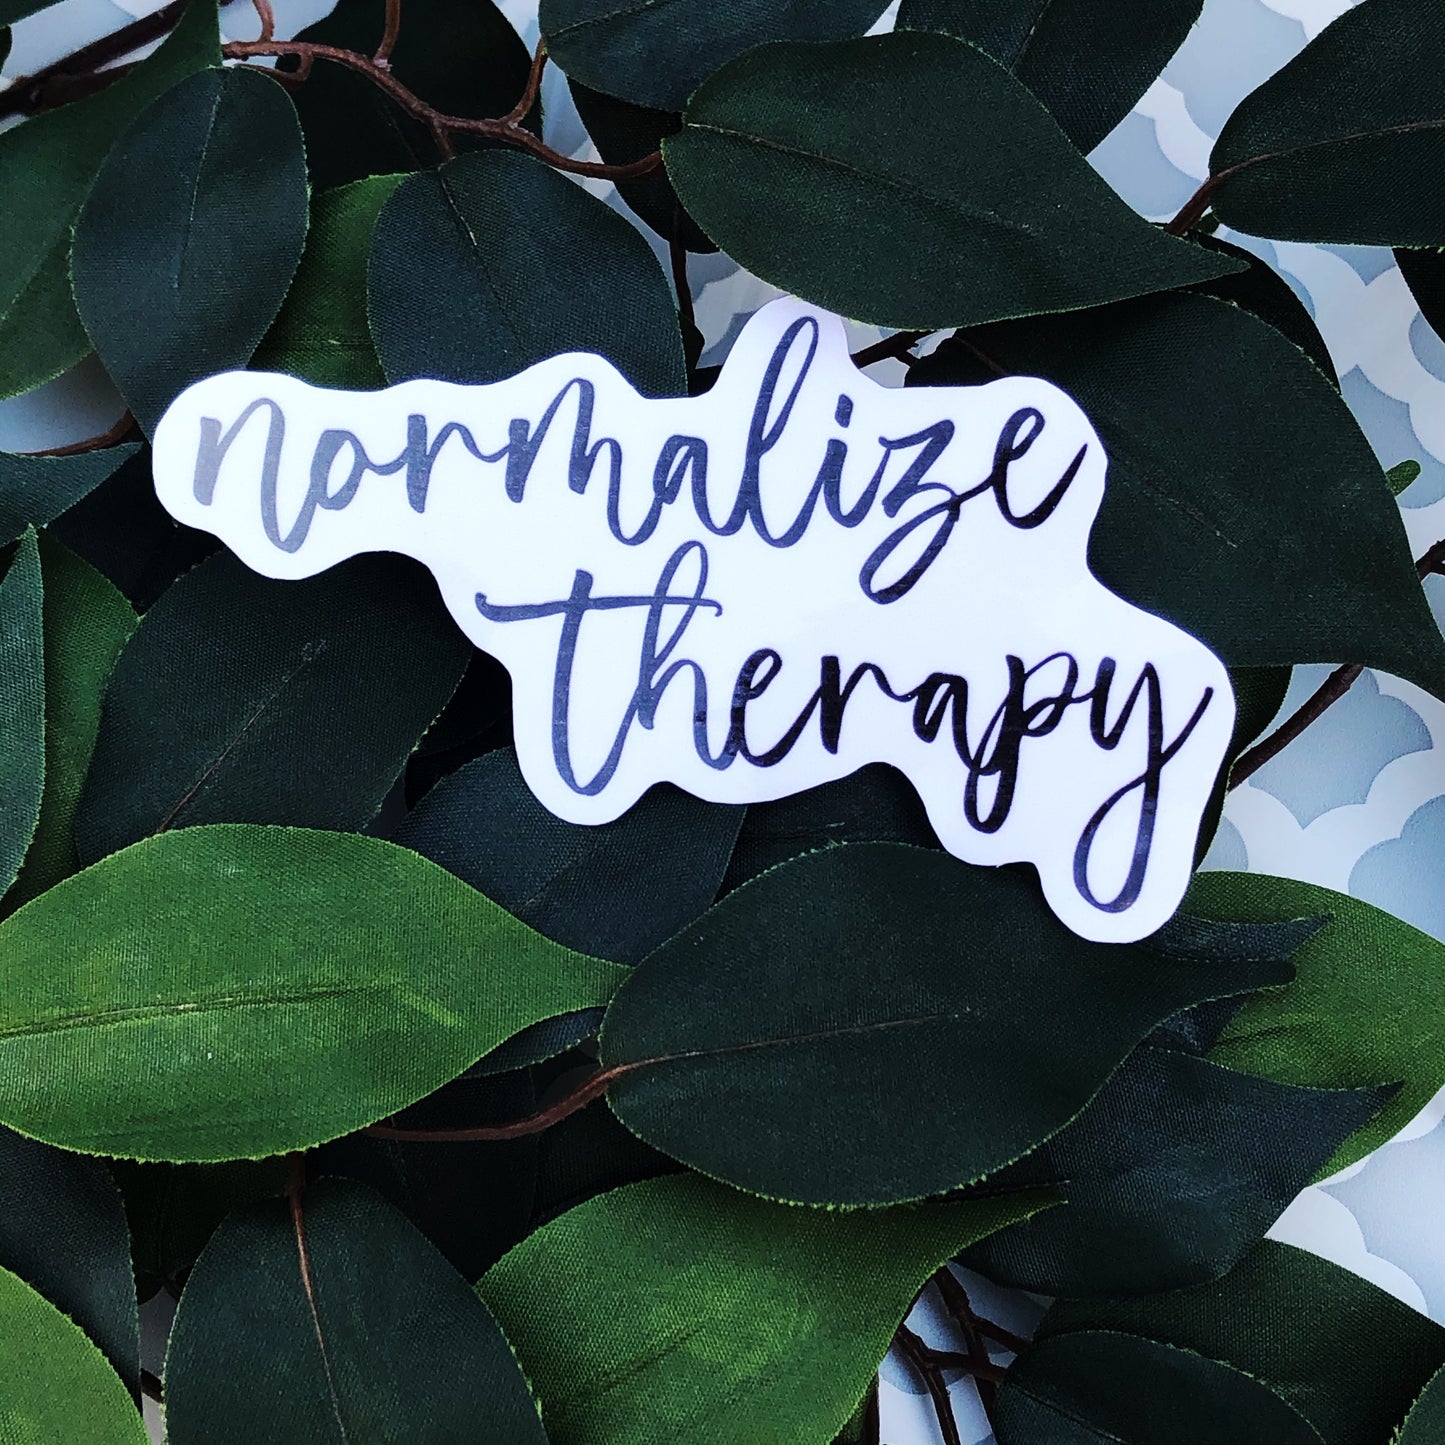 Normalize Therapy Vinyl Sticker